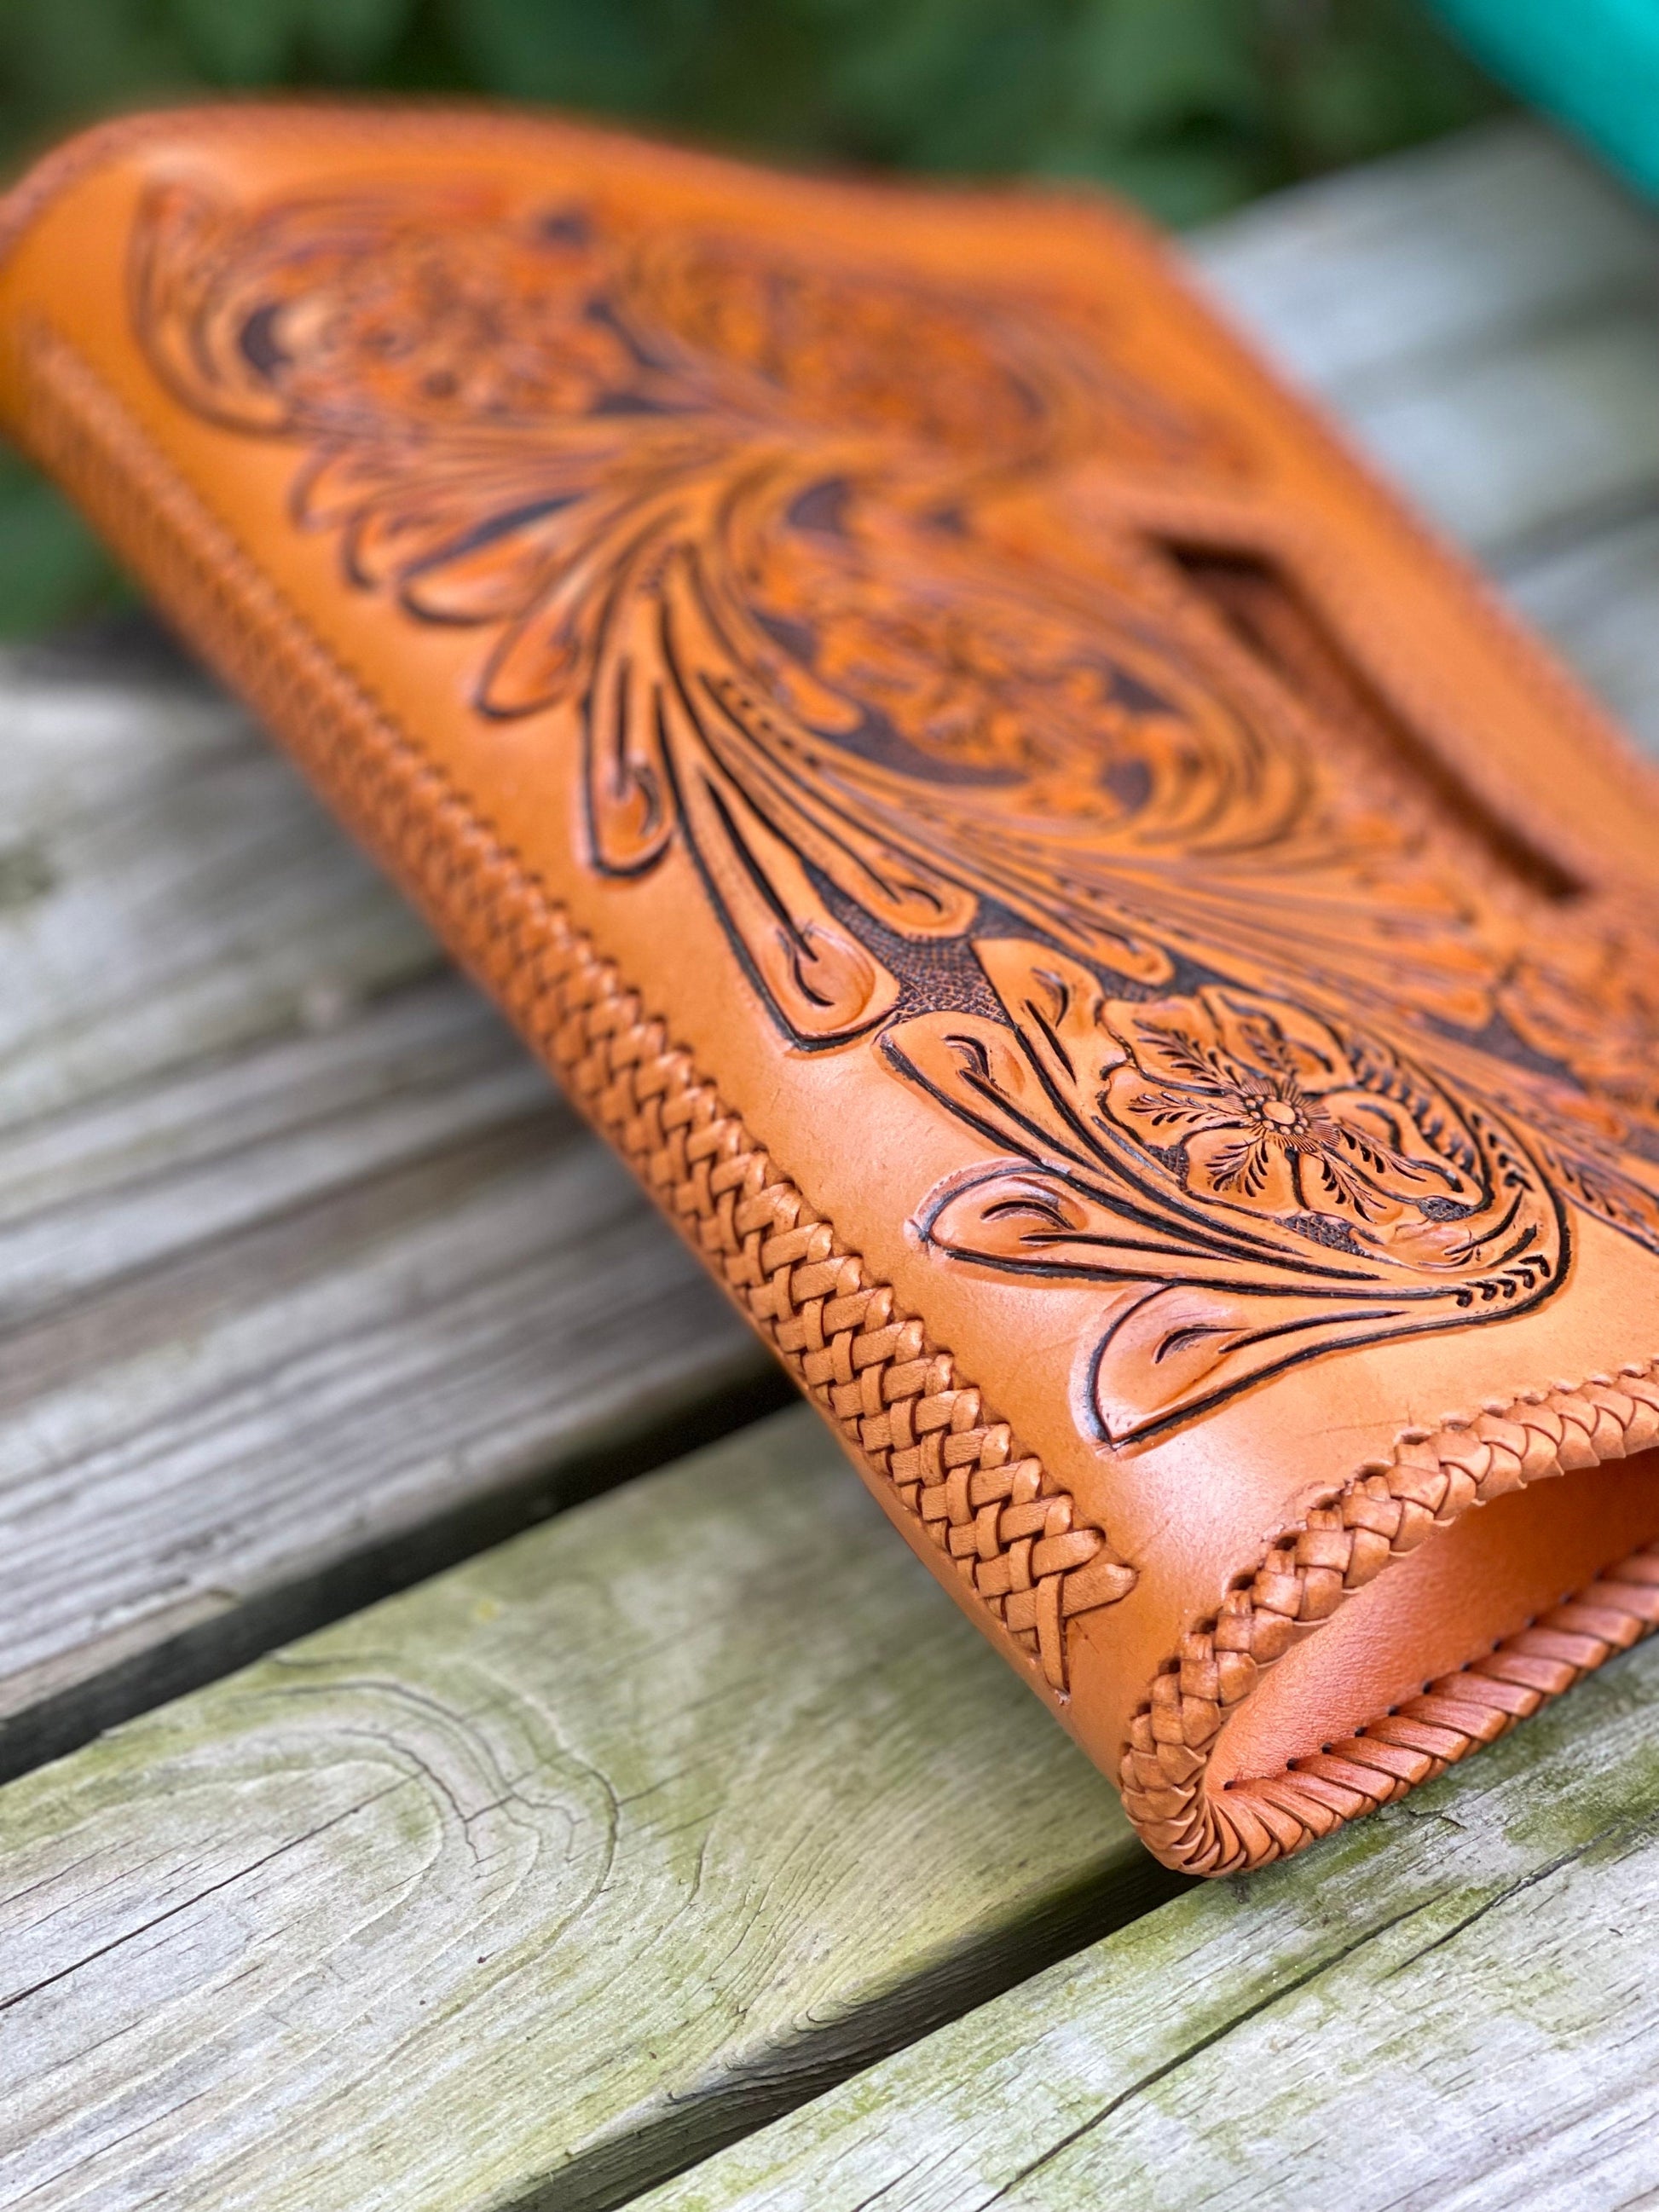 Hand-Tooled Leather Small Clutch, "YENNY" by ALLE - ALLE Handbags